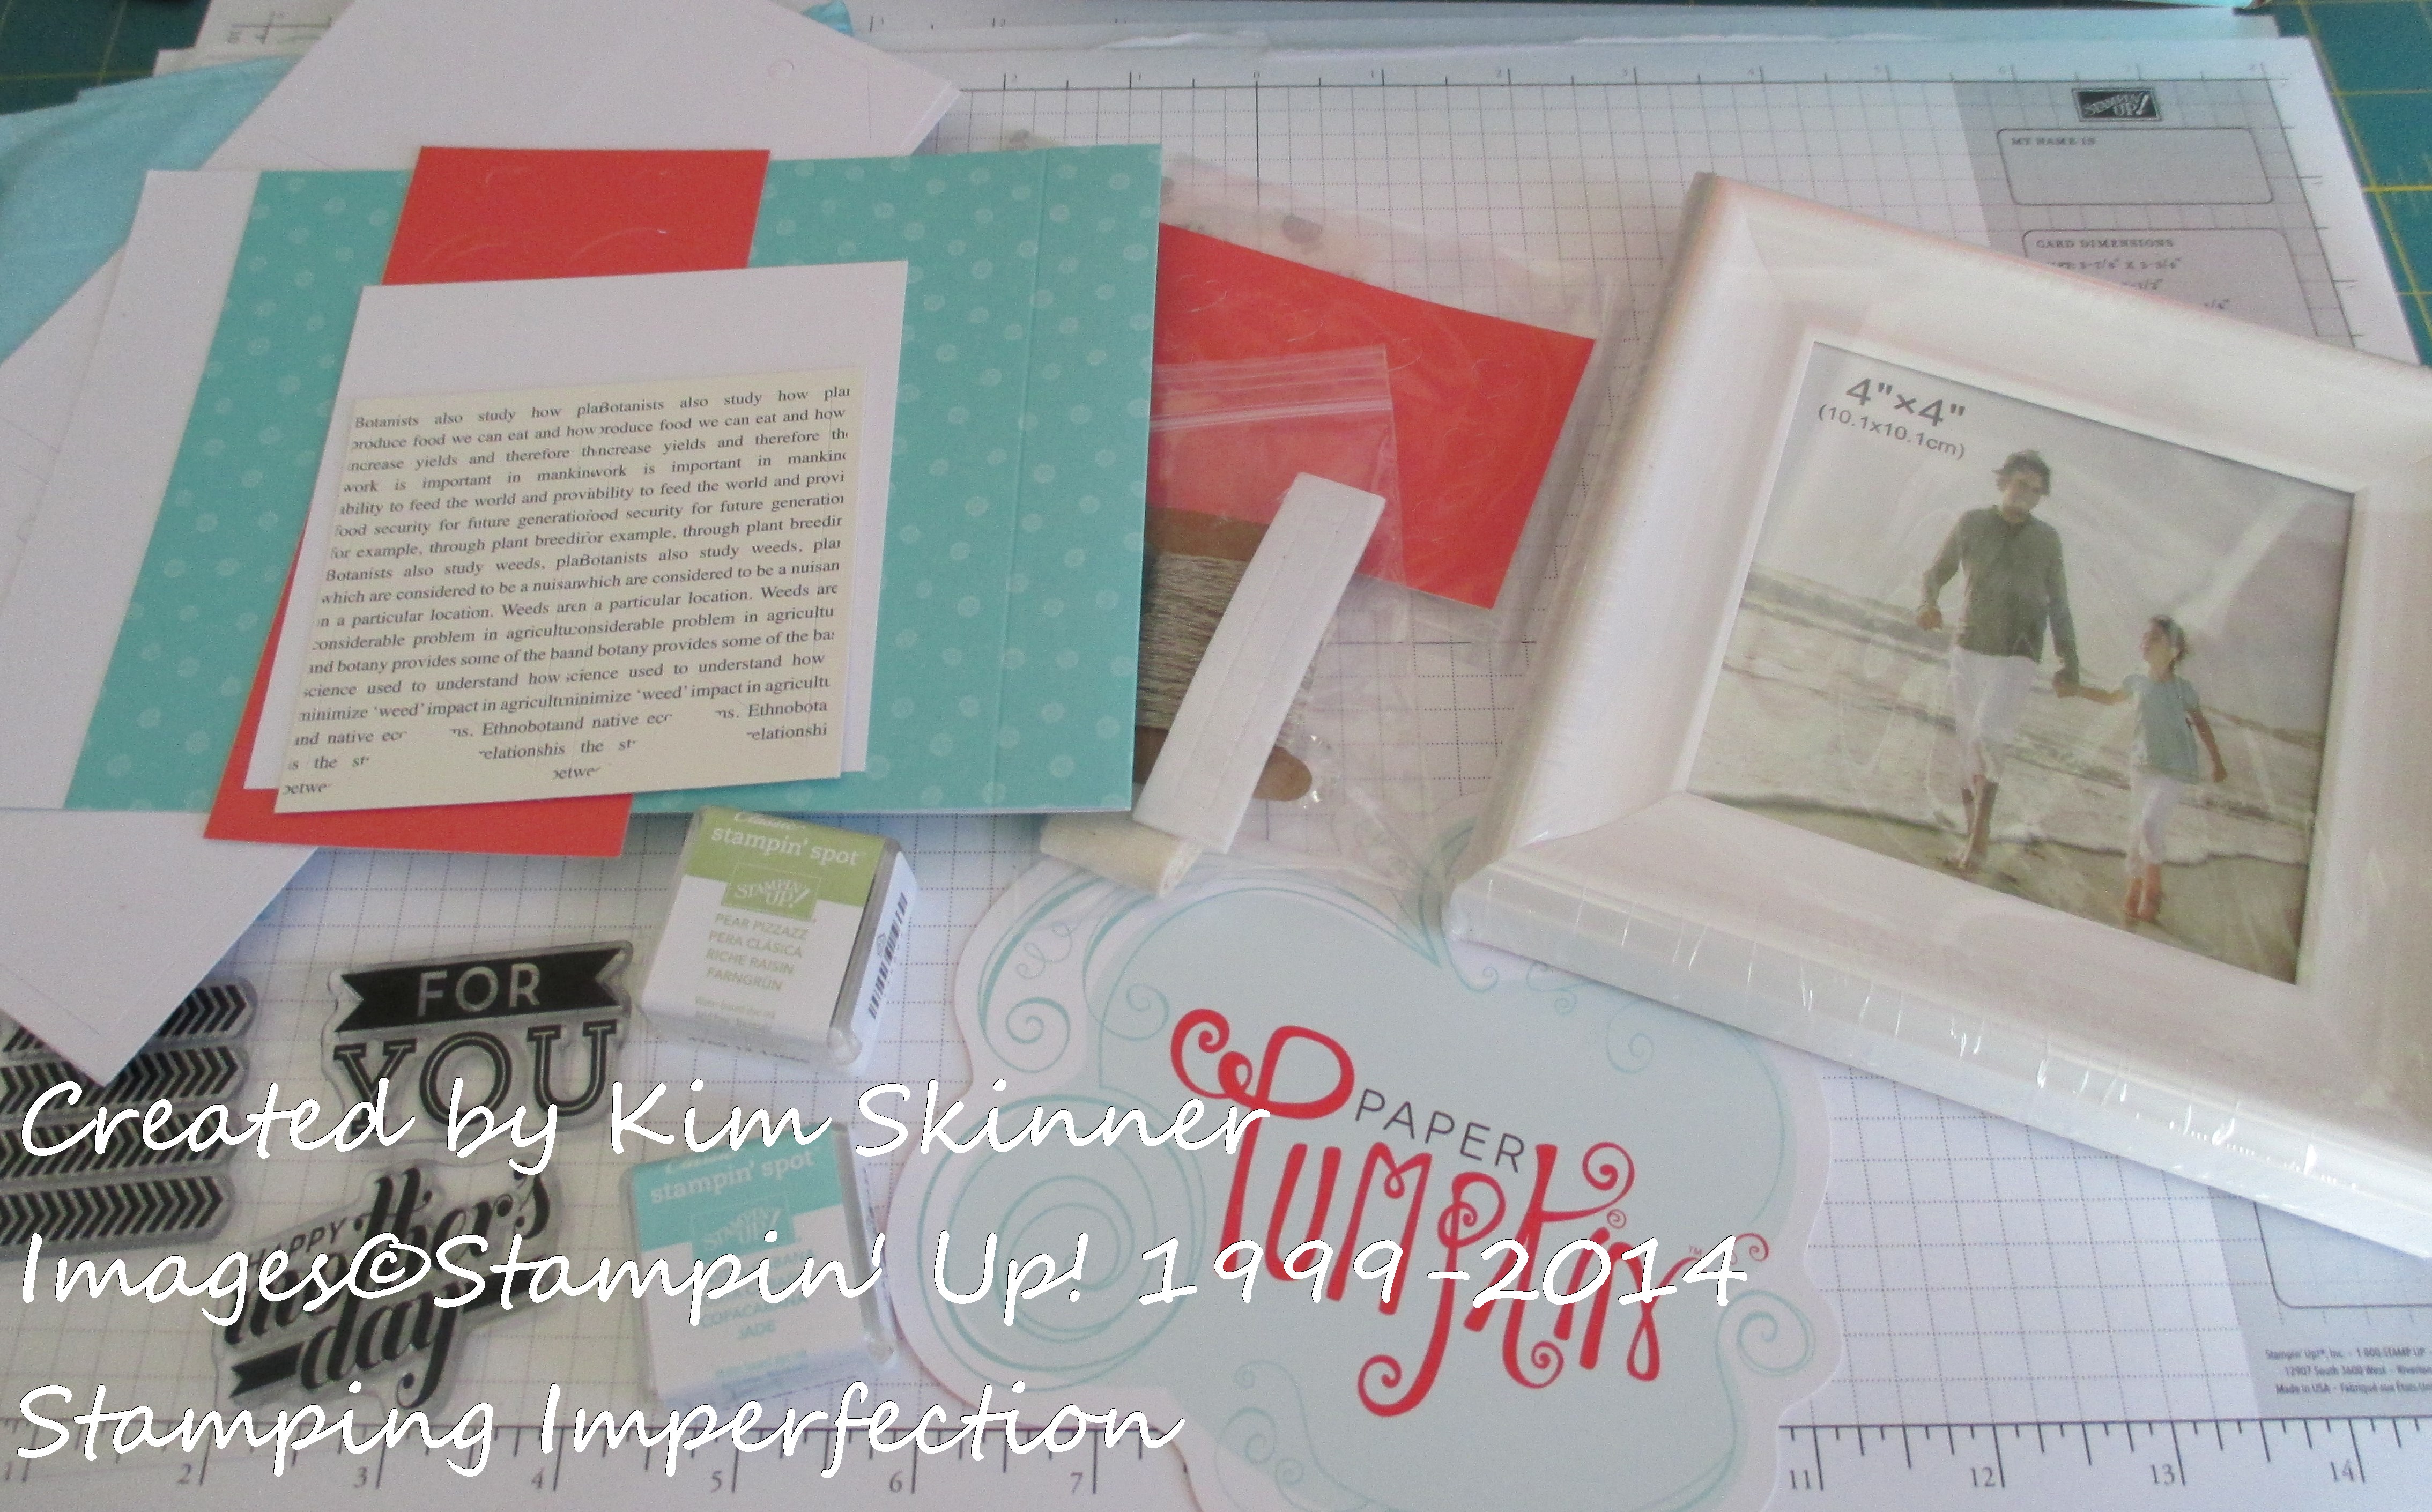 Stamping Imperfection frame projects